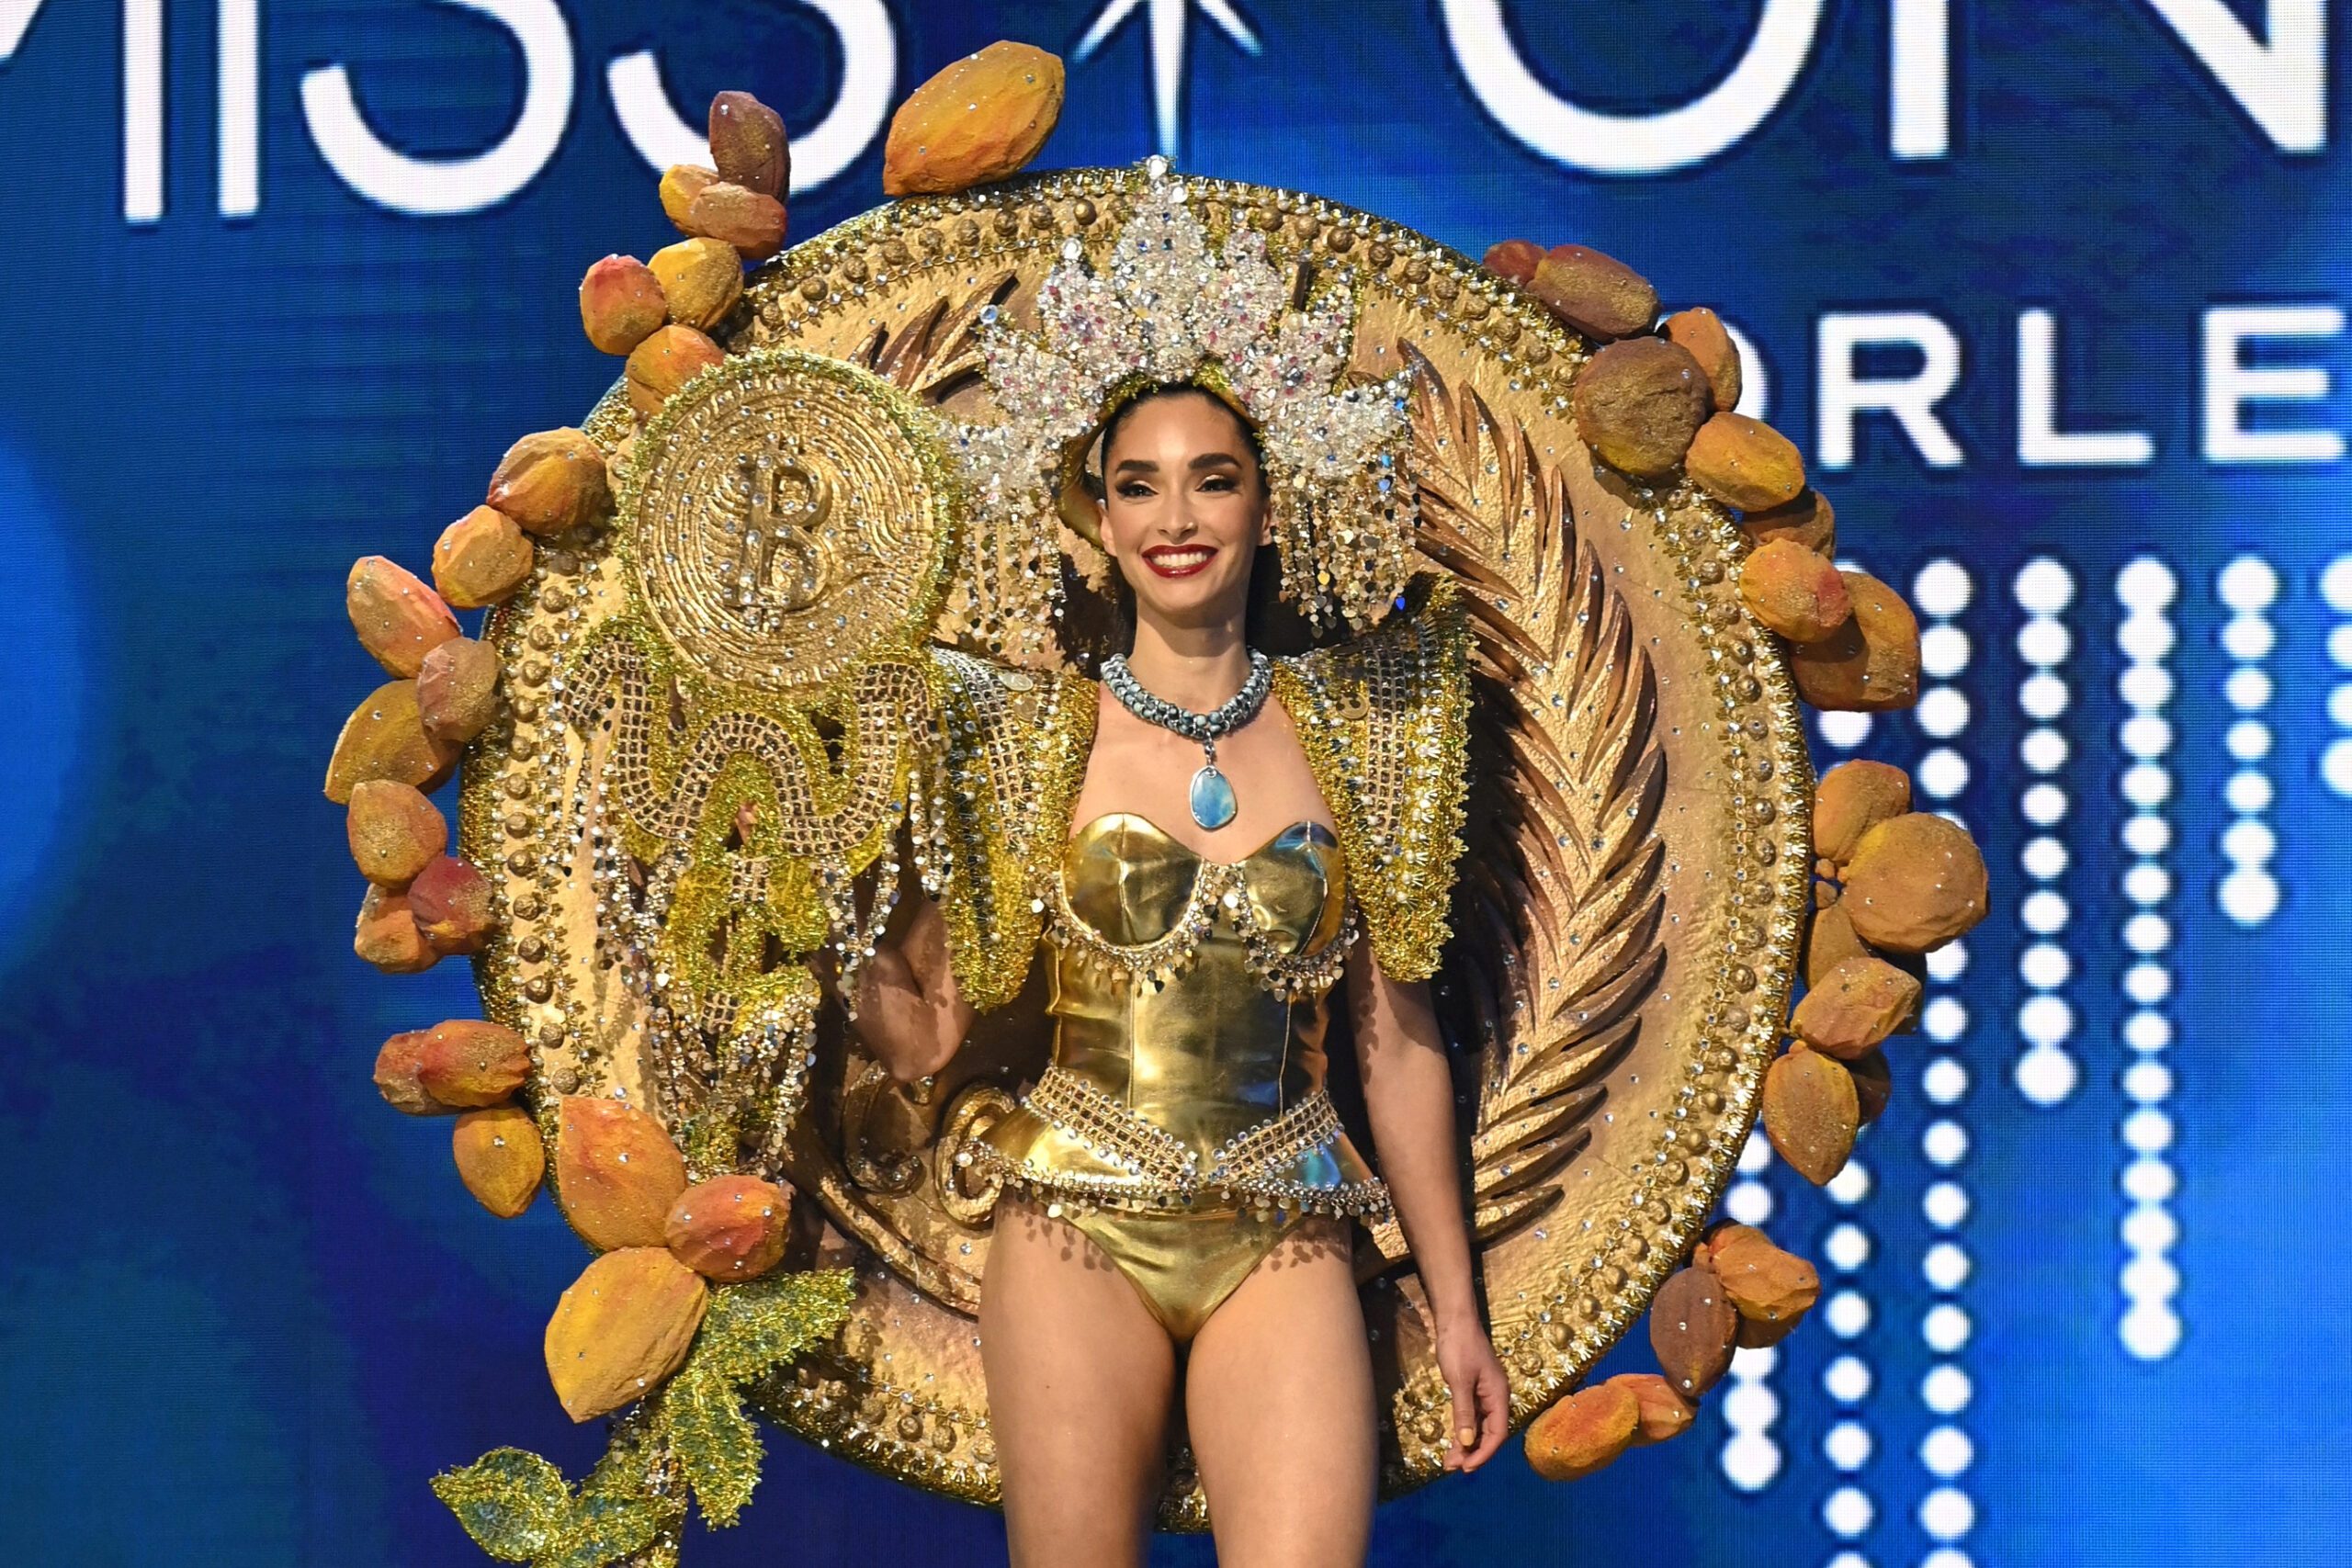 LOOK: Miss El Salvador dons golden bitcoin outfit at Miss Universe 2022 beauty pageant